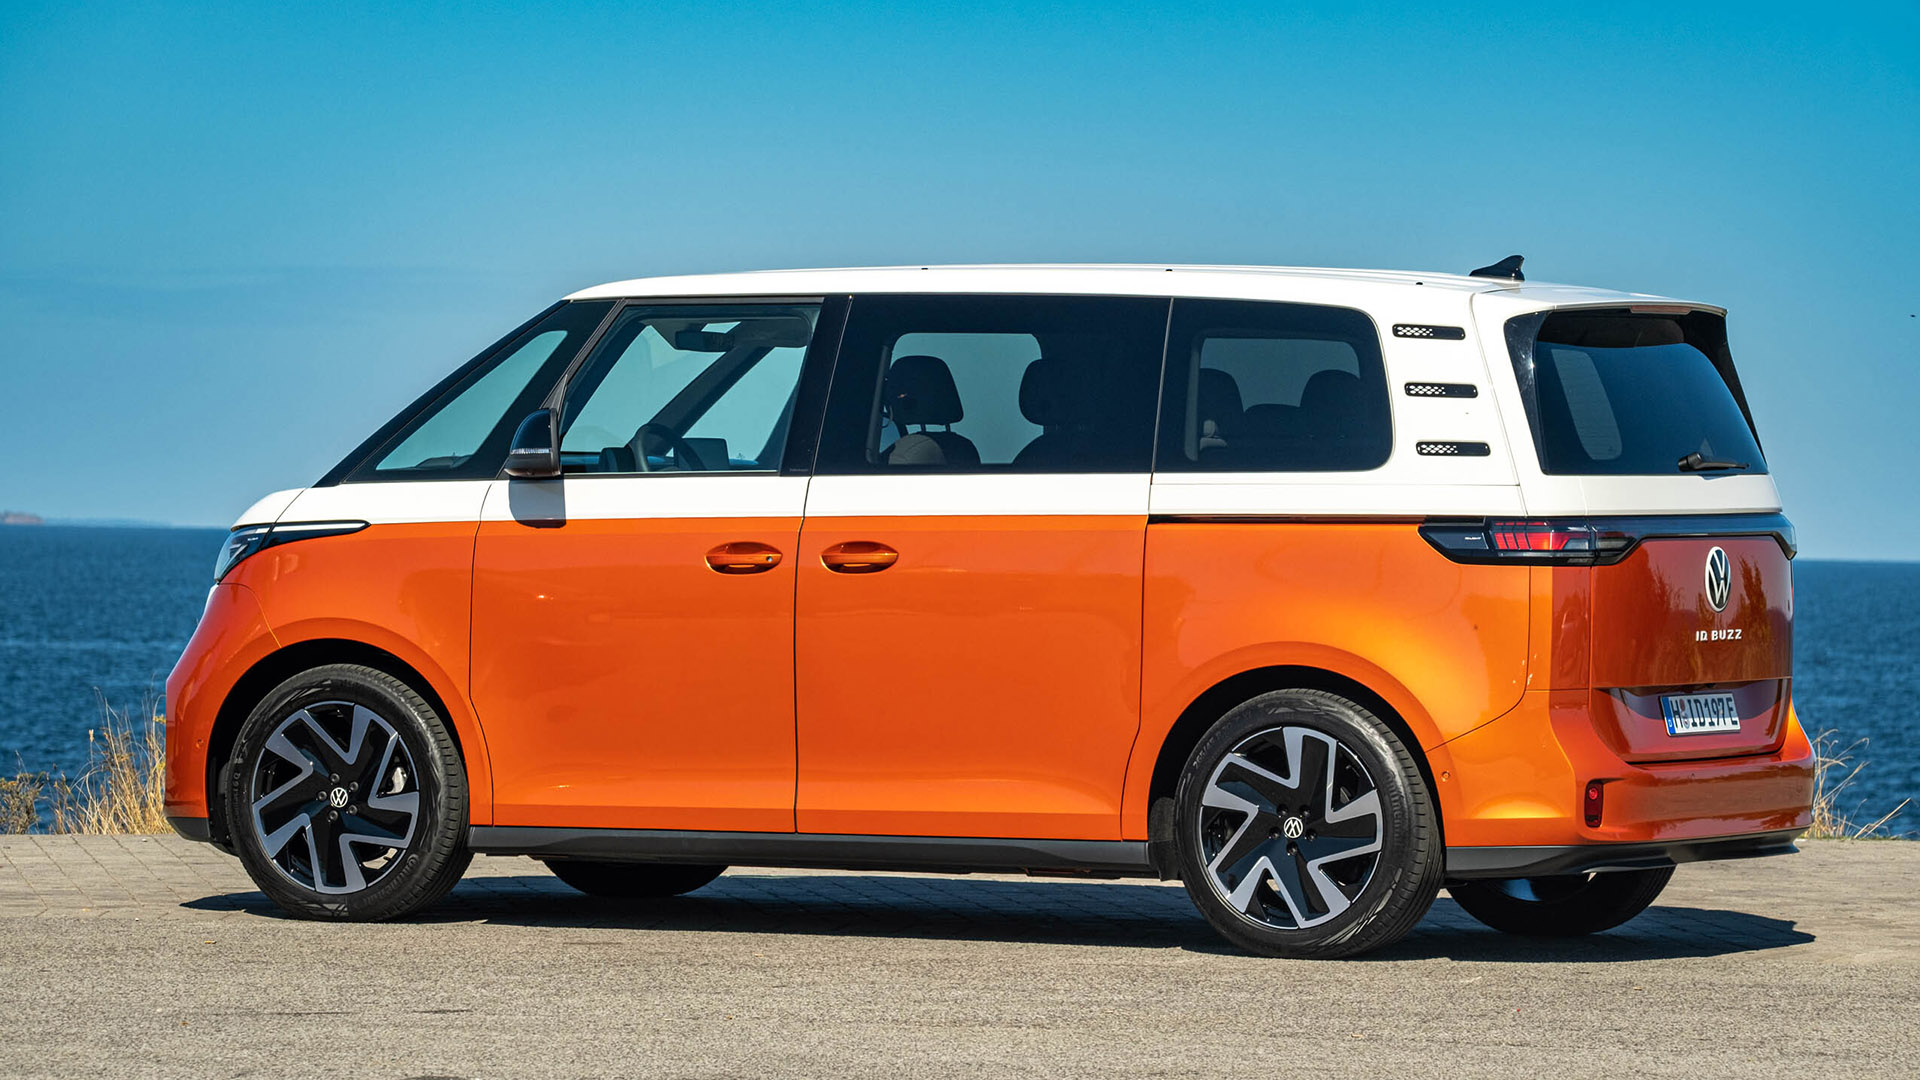 medley Gelach Verplicht 2023 VW ID Buzz First Drive Review: The Bus Is Back With a Stellar,  Retro-Chic Electric Van